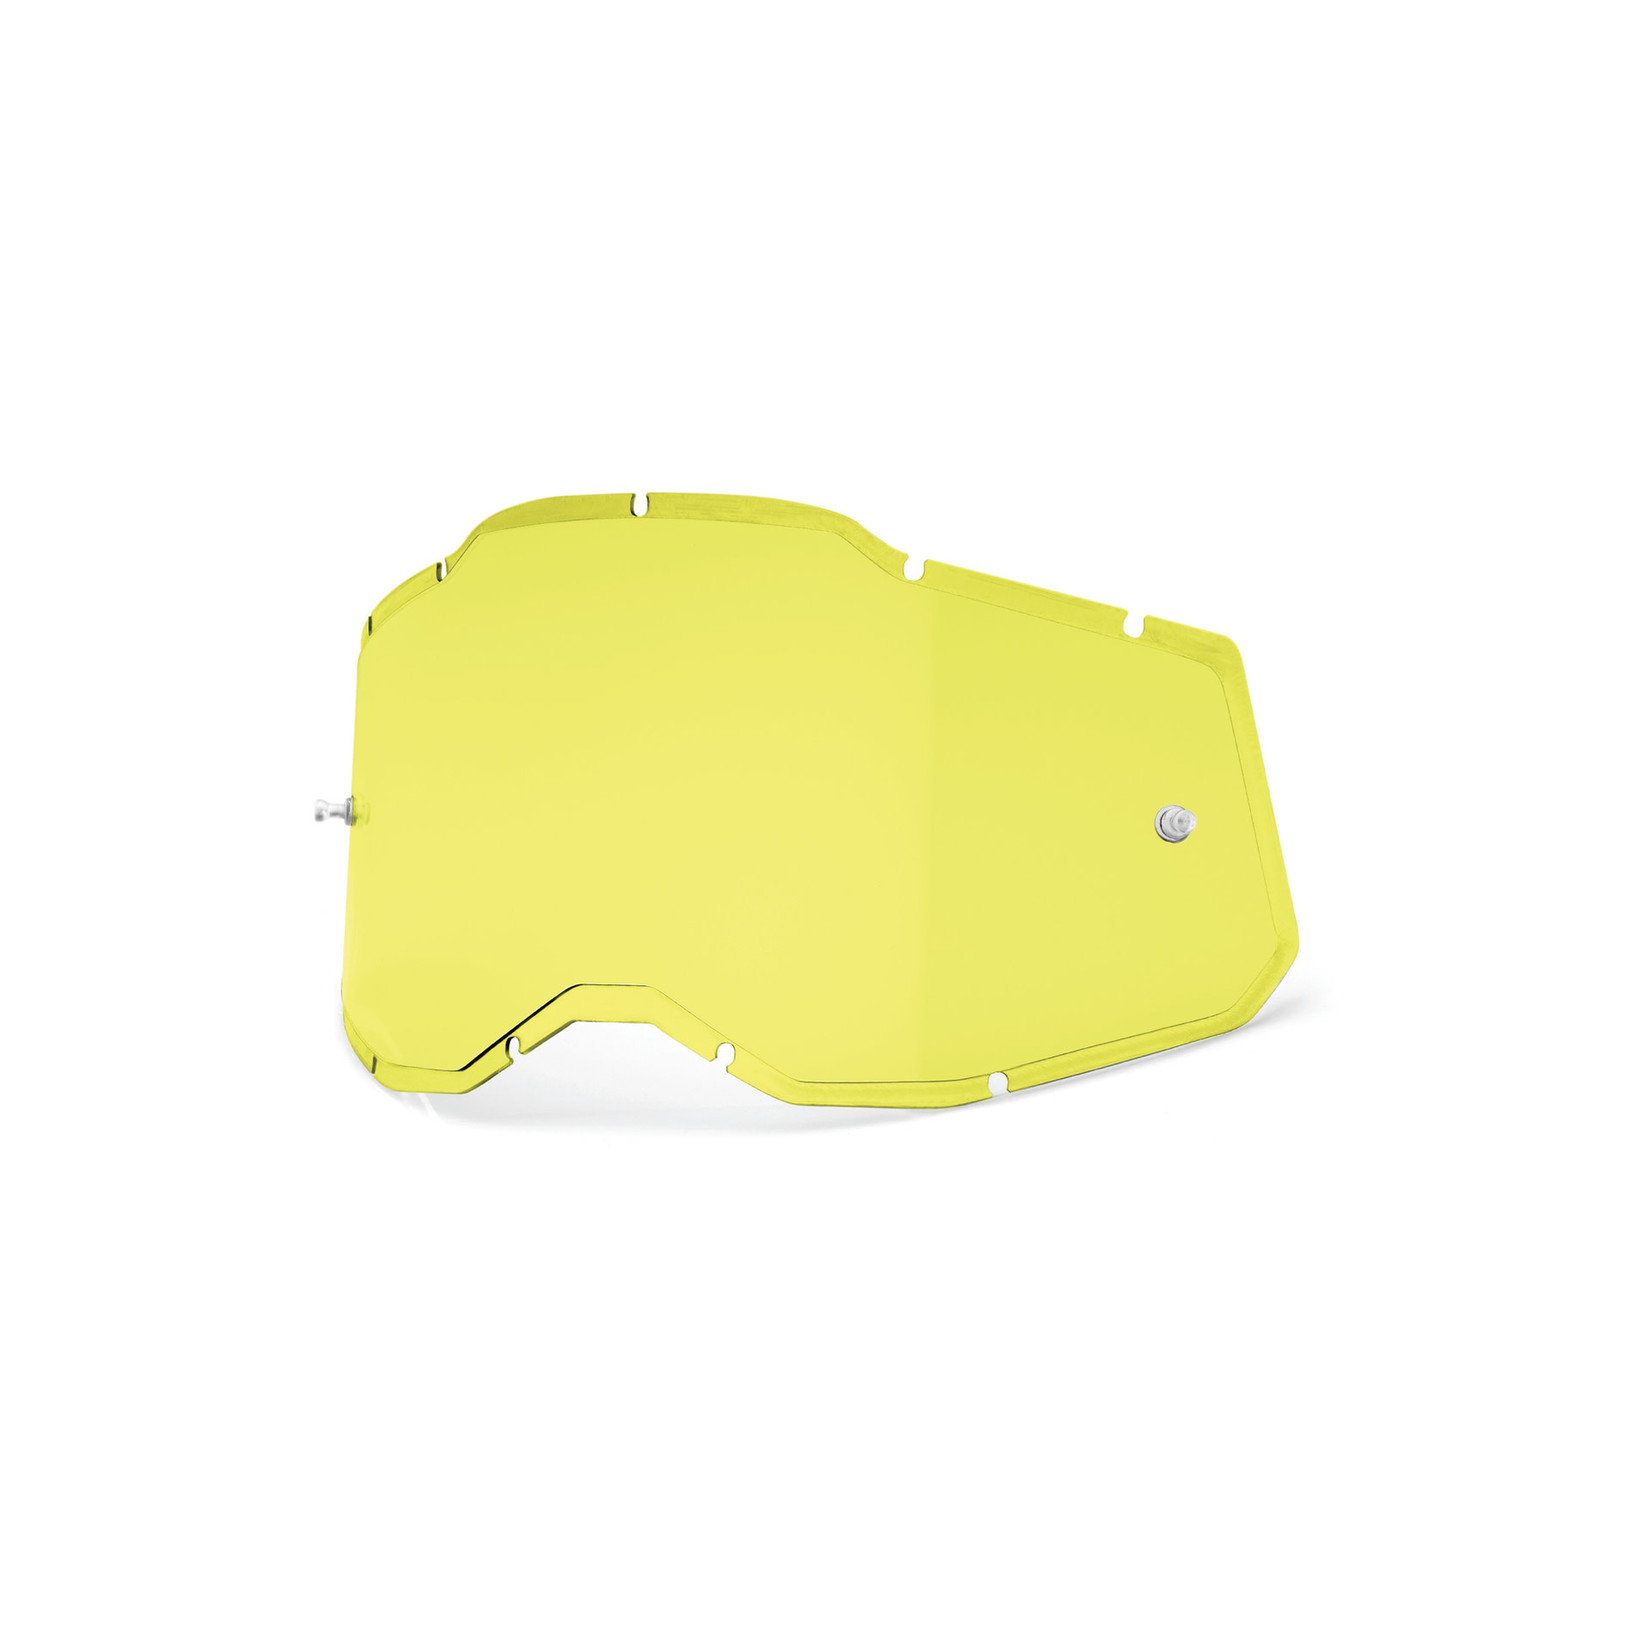 100 Percent 100% RC2/AC2/ST2 Plus Bike/Cycling Goggle Replacement Lens - Hiper Yellow